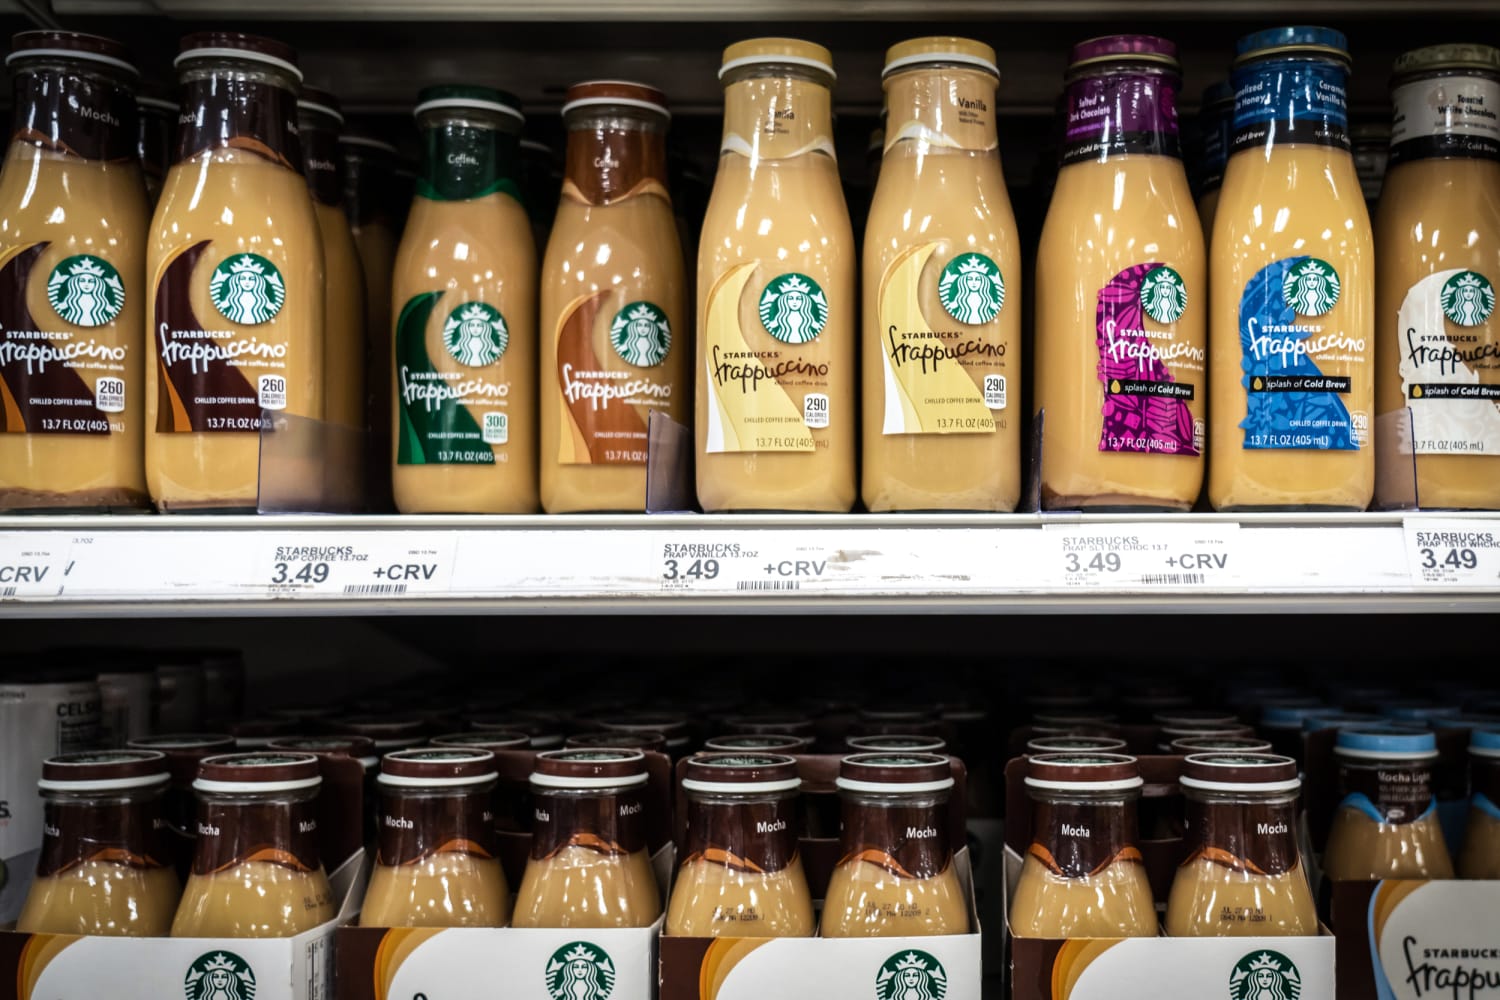 Over 300,000 Starbucks vanilla Frappuccino drinks recalled after glass is found in some bottles